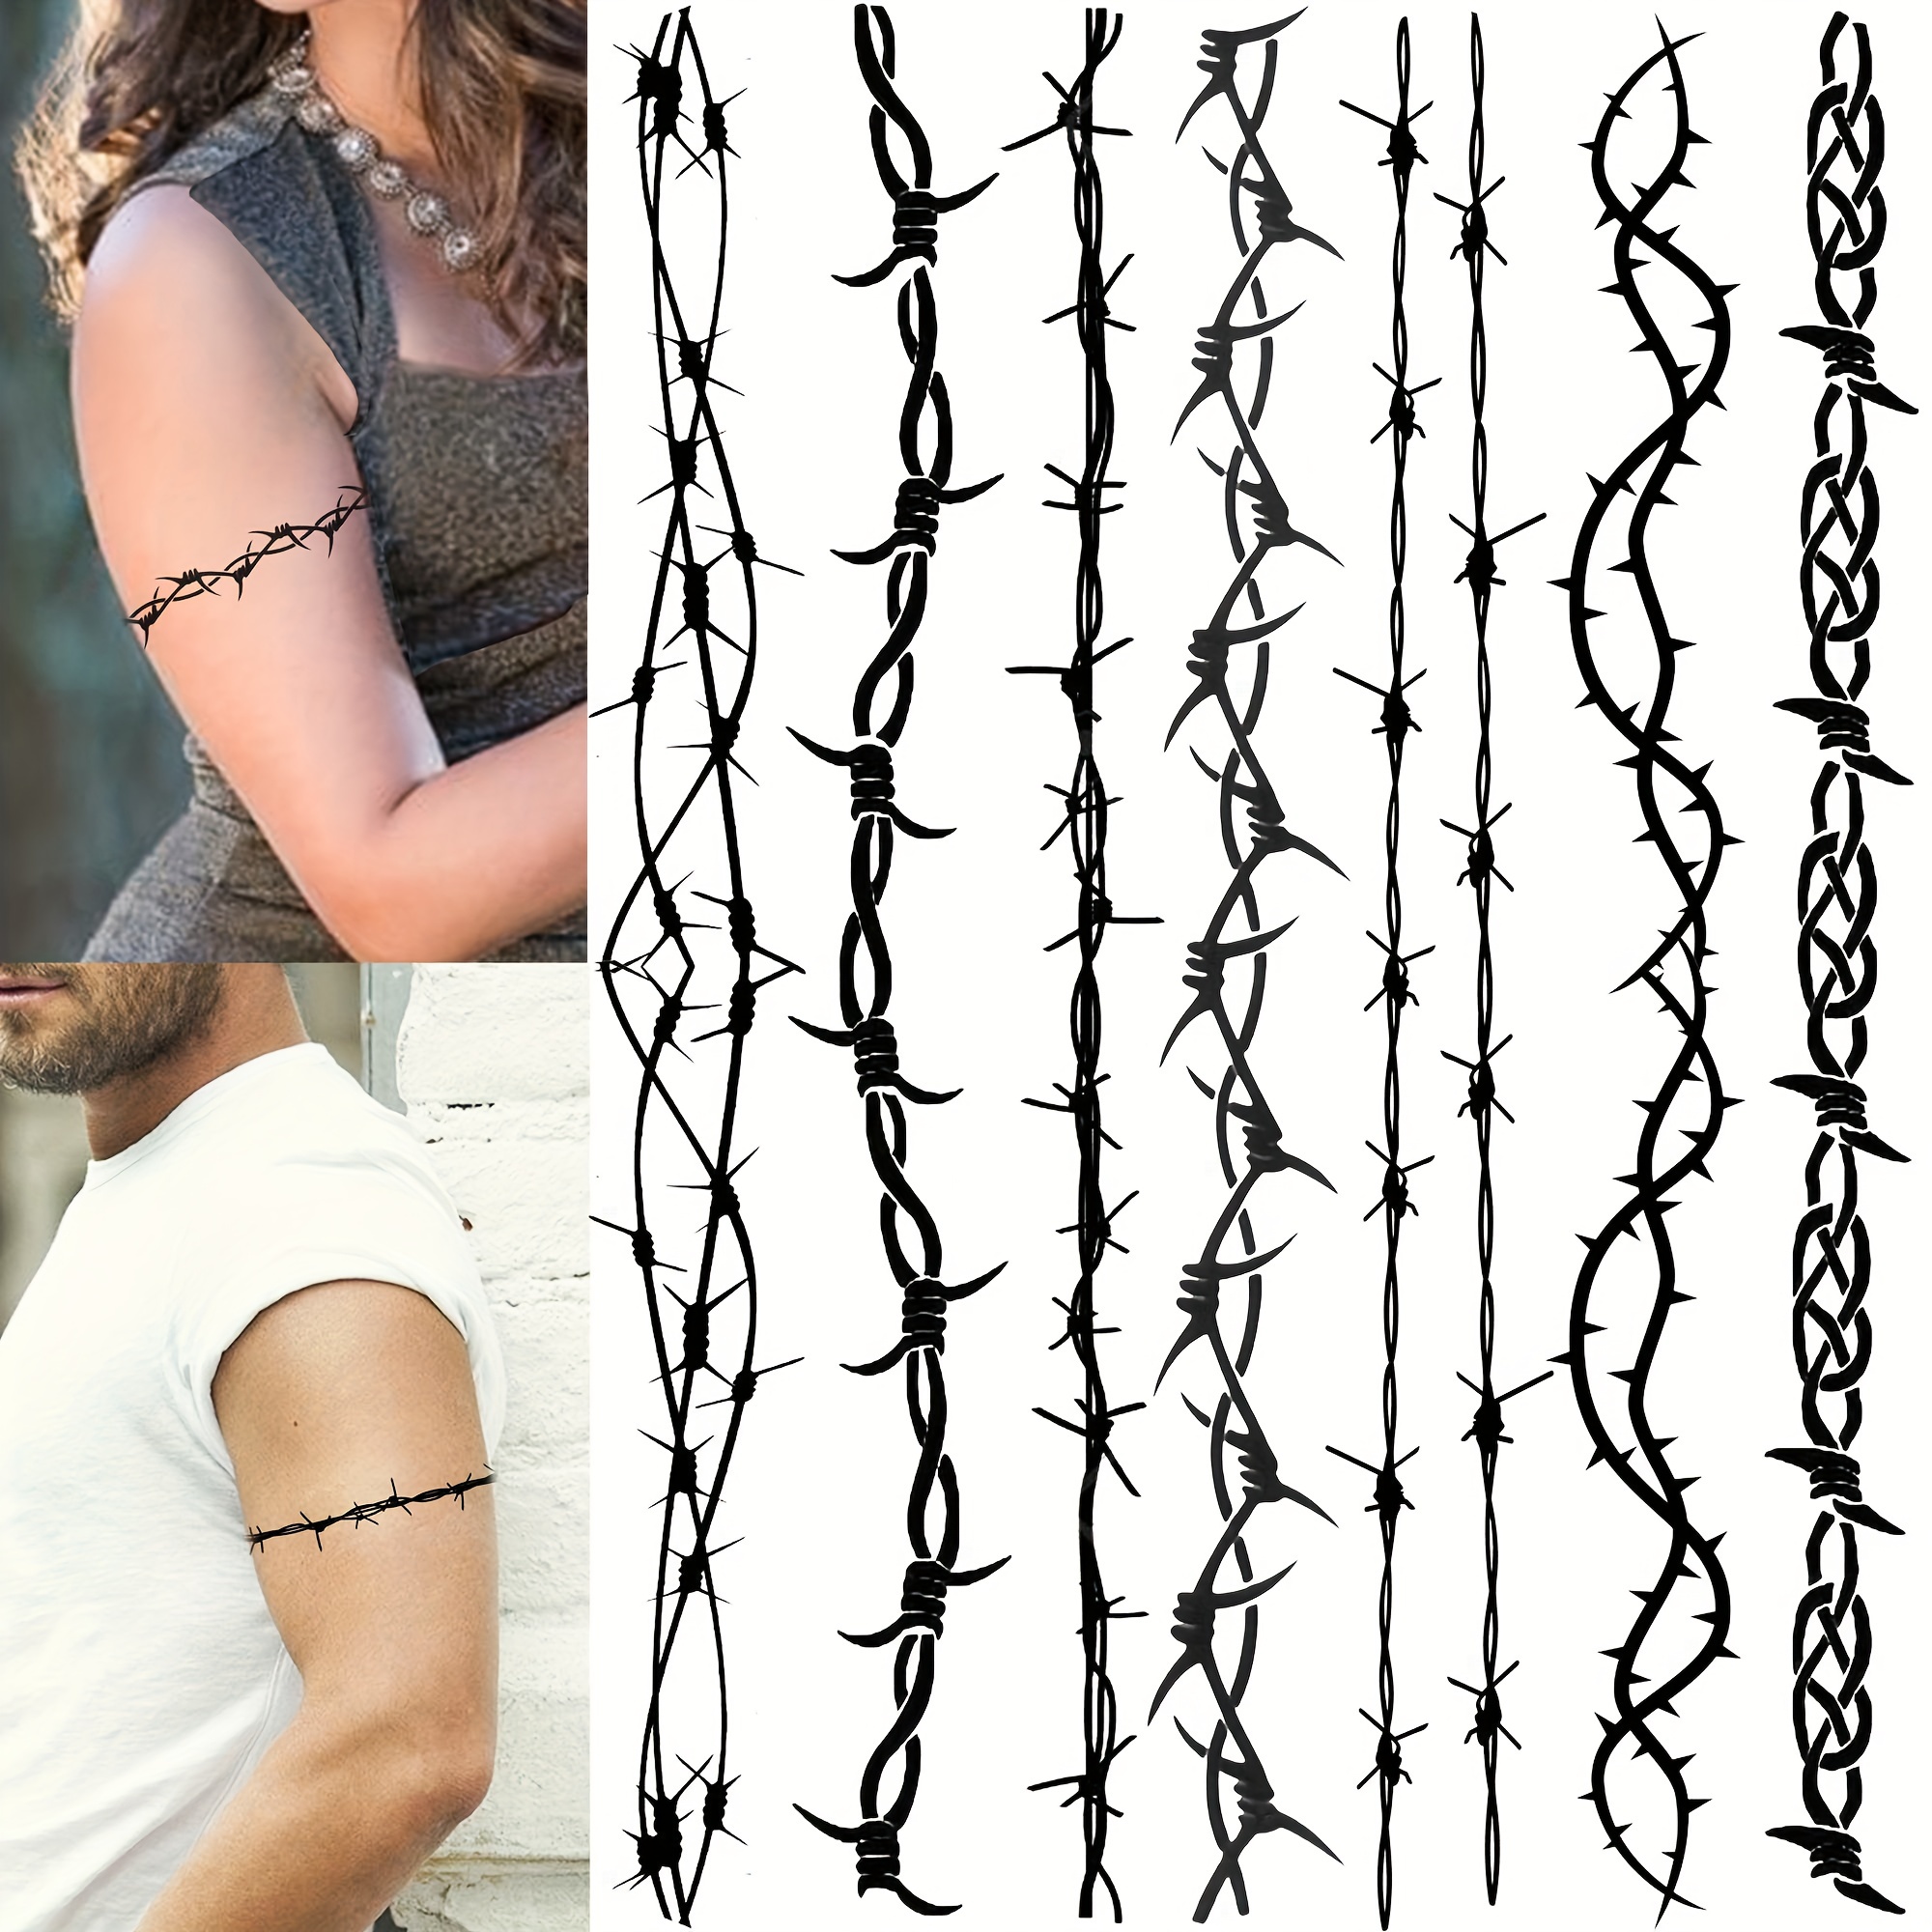 

7 Sheets Barb Wire Temporary Tattoos For Women Men Adults, Halloween Barb Wire Tattoos Stickers, Prison Prisoner Tattoos Costume, Fake Arm Tattoo